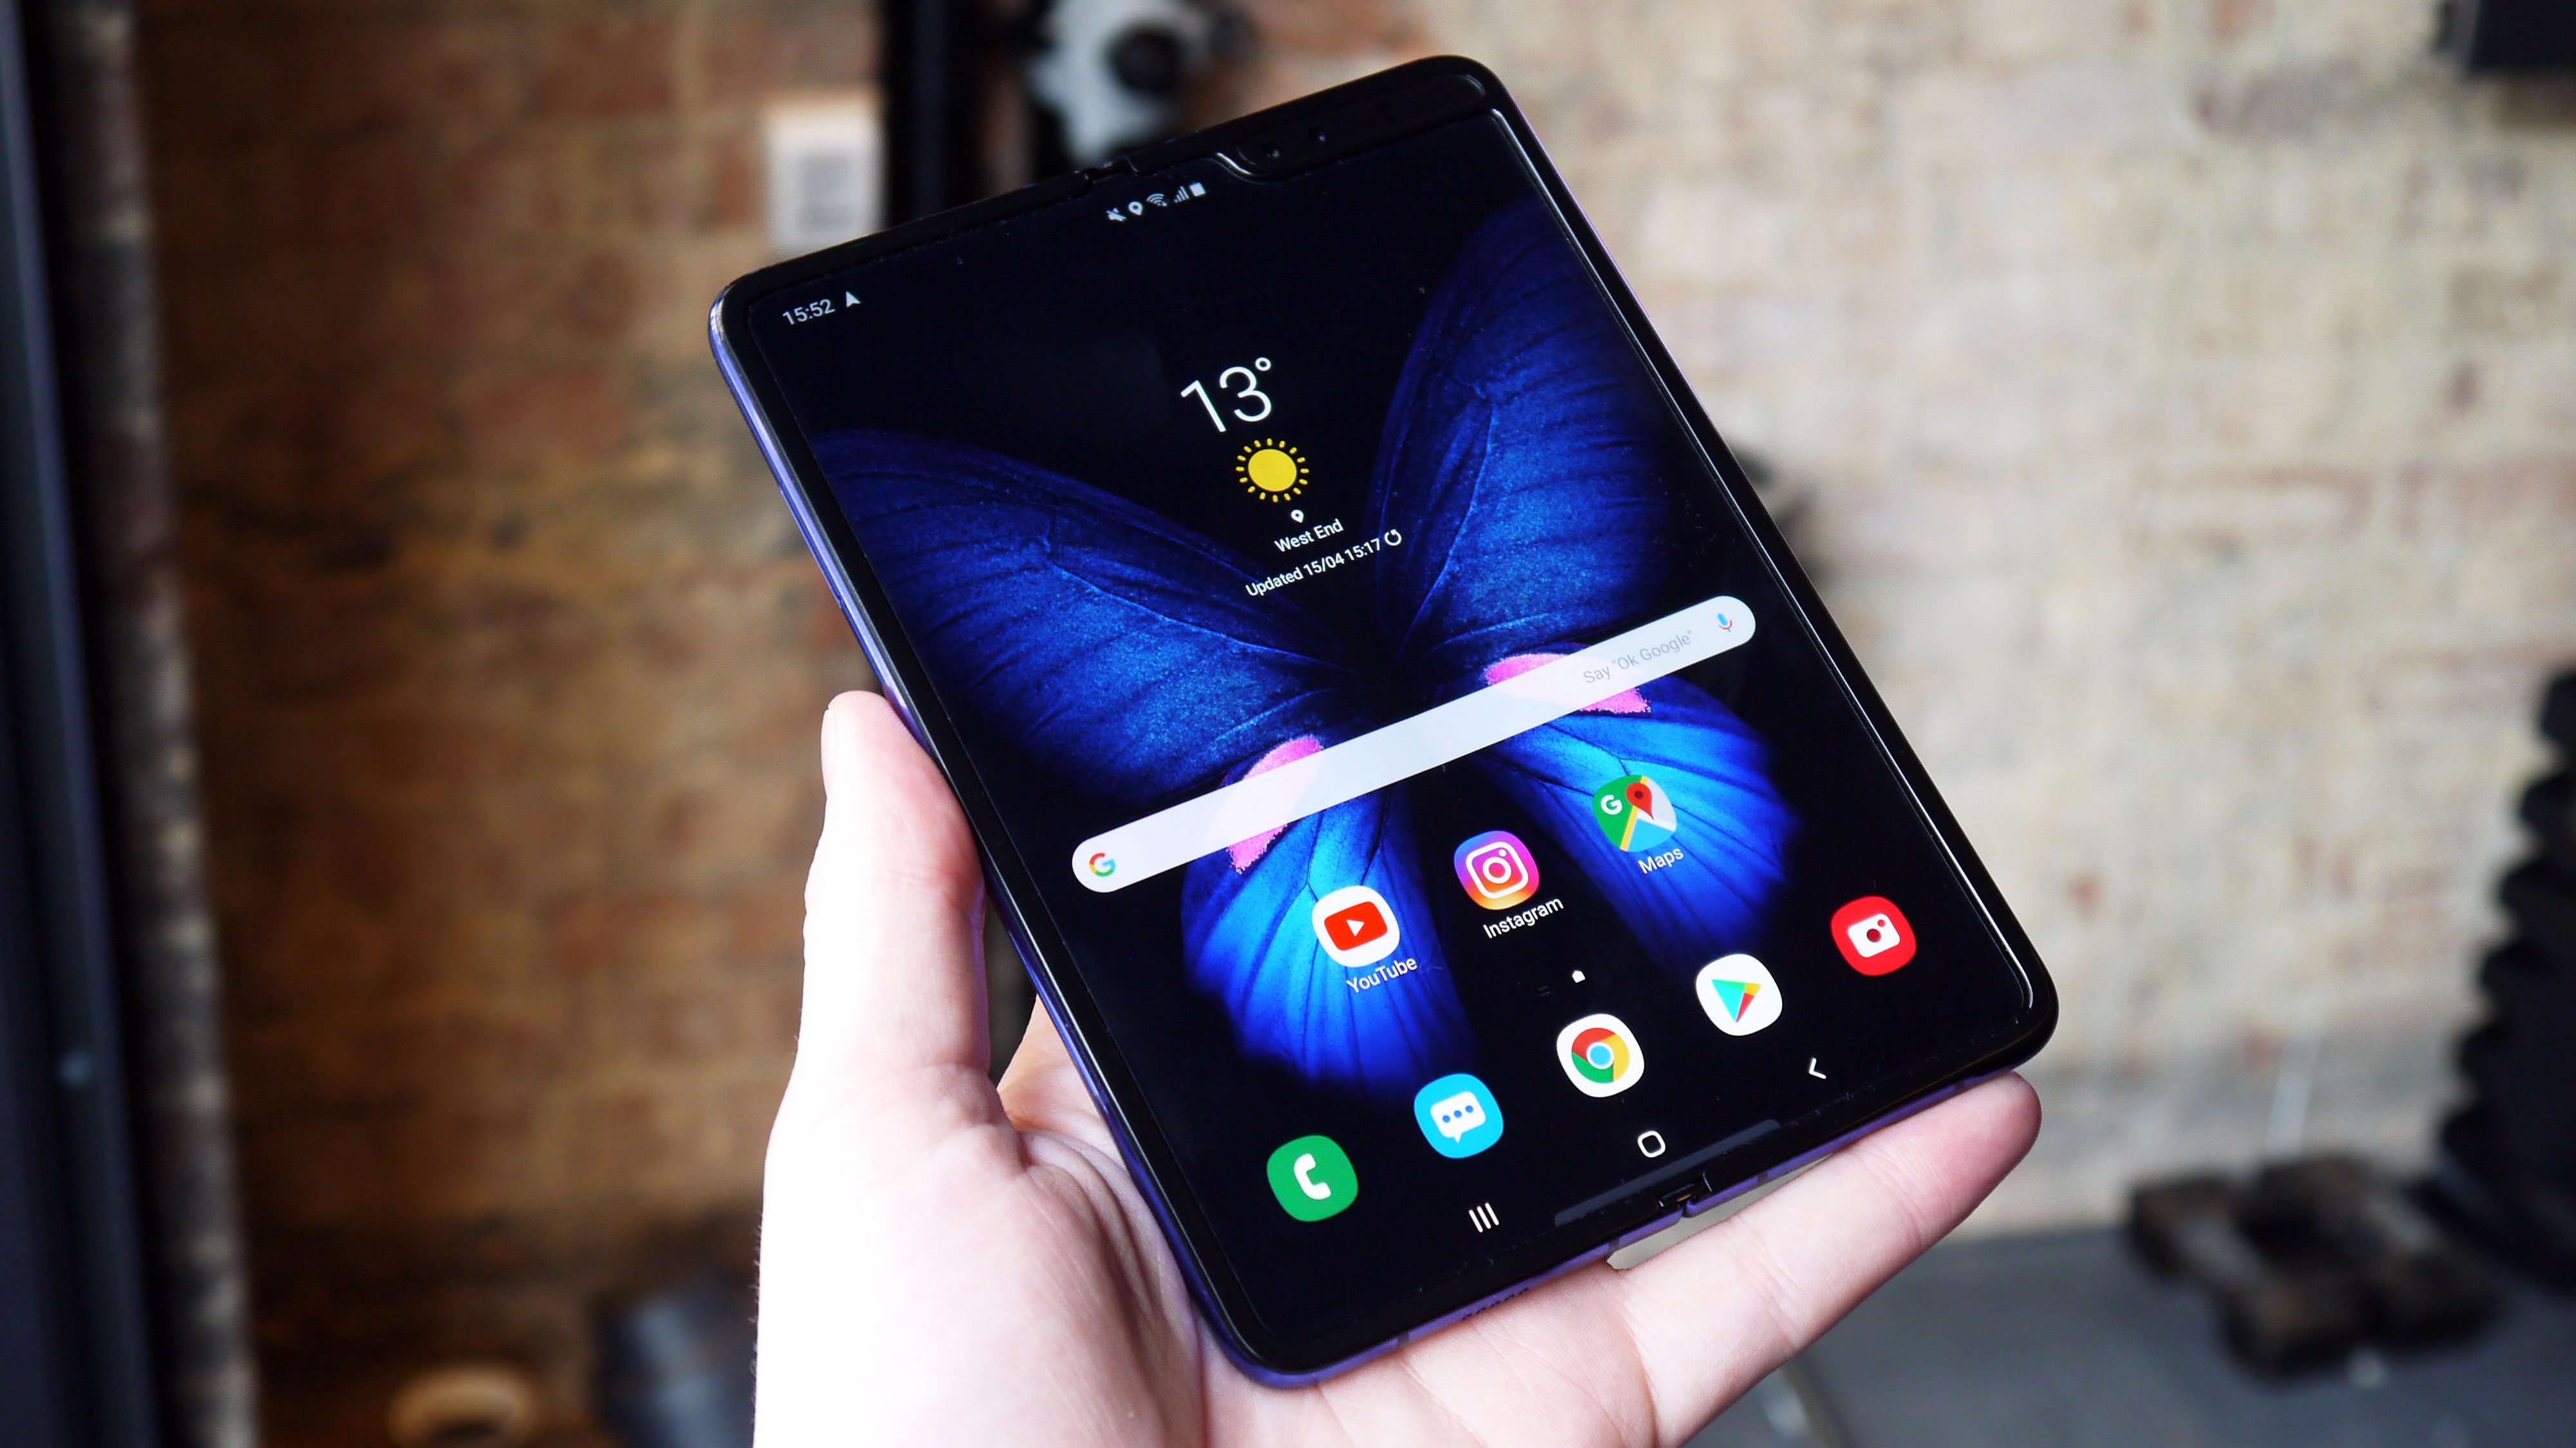 Samsung Galaxy Fold launches in India on October 1st